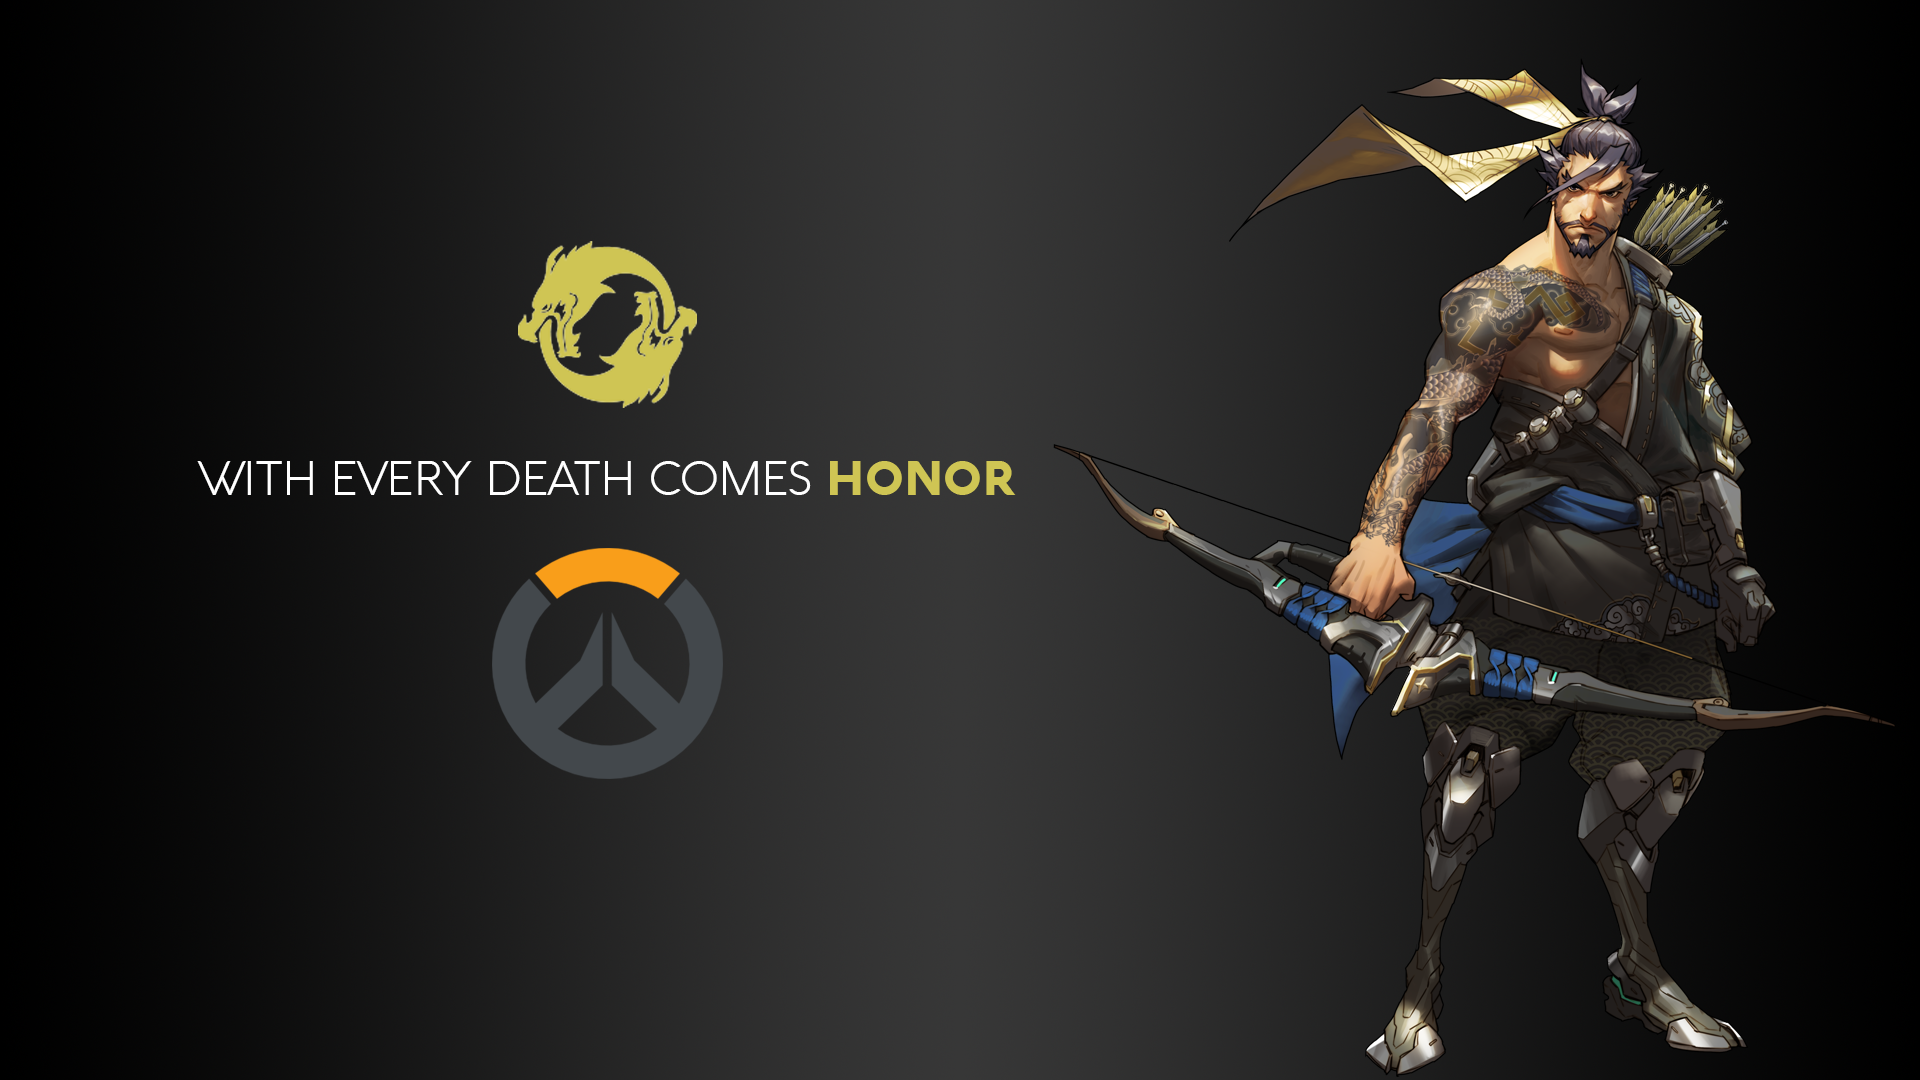 General 1920x1080 Blizzard Entertainment Overwatch video games logo DXHHH101 (Author) Hanzo (Overwatch) PC gaming bow and arrow inked men men video game men video game characters